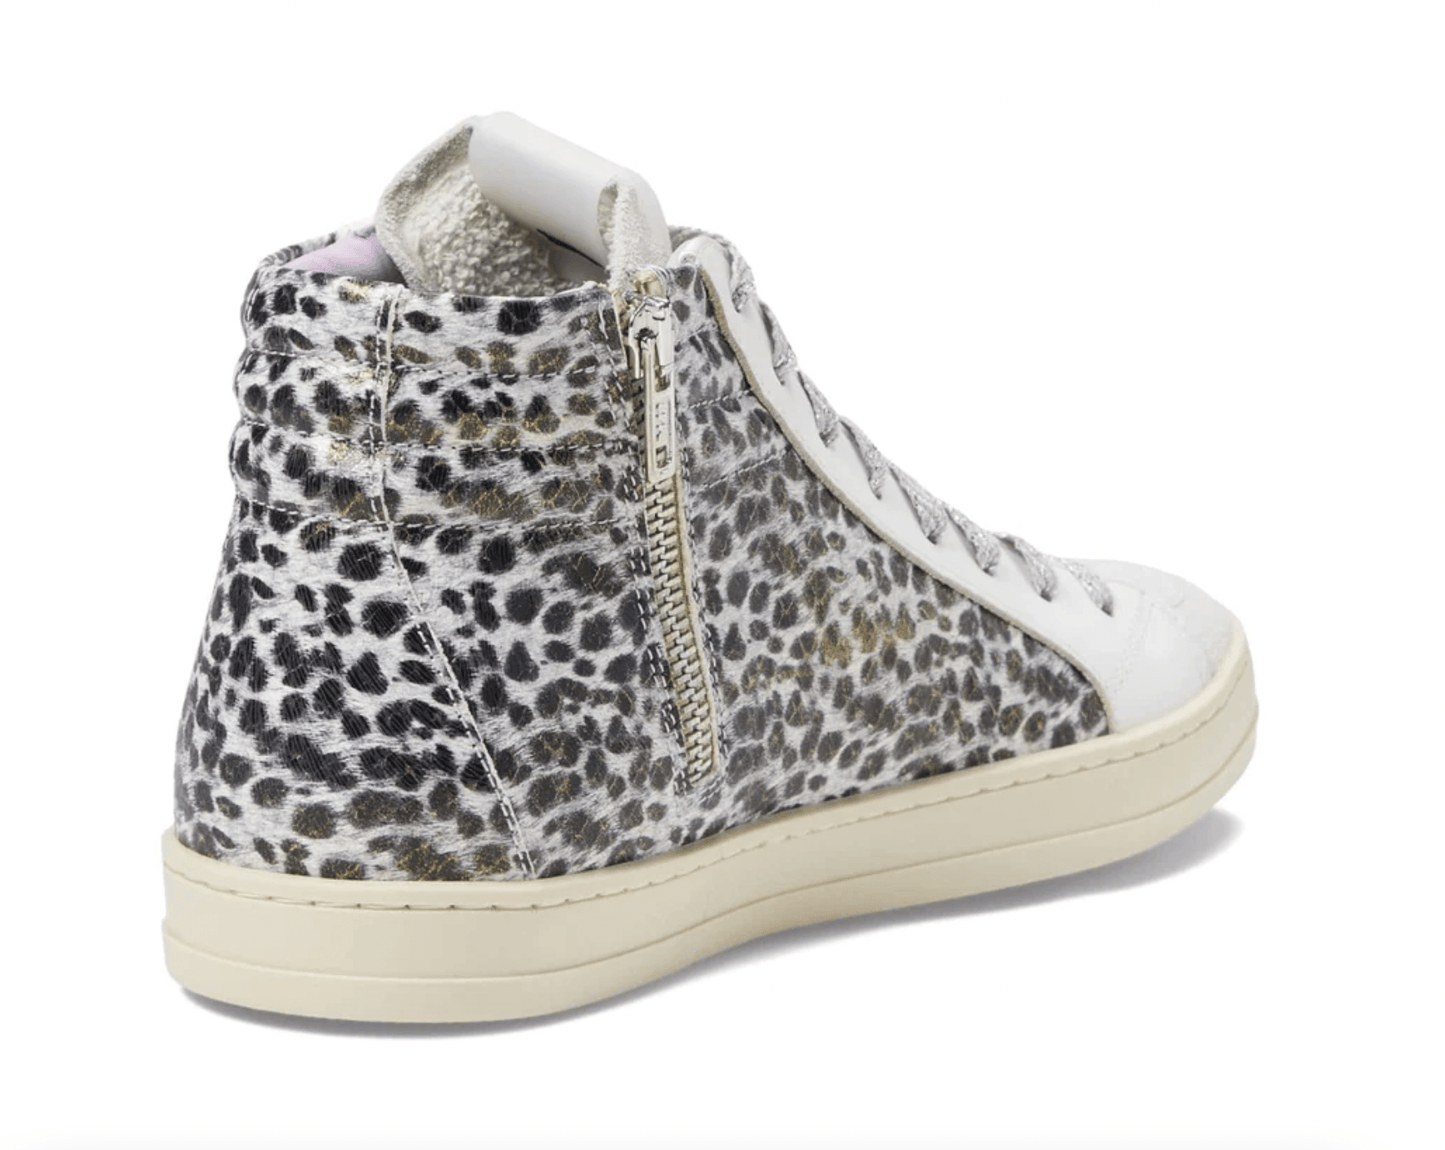 Skate Gold Leopard High Top Sneaker by P448 - Haven